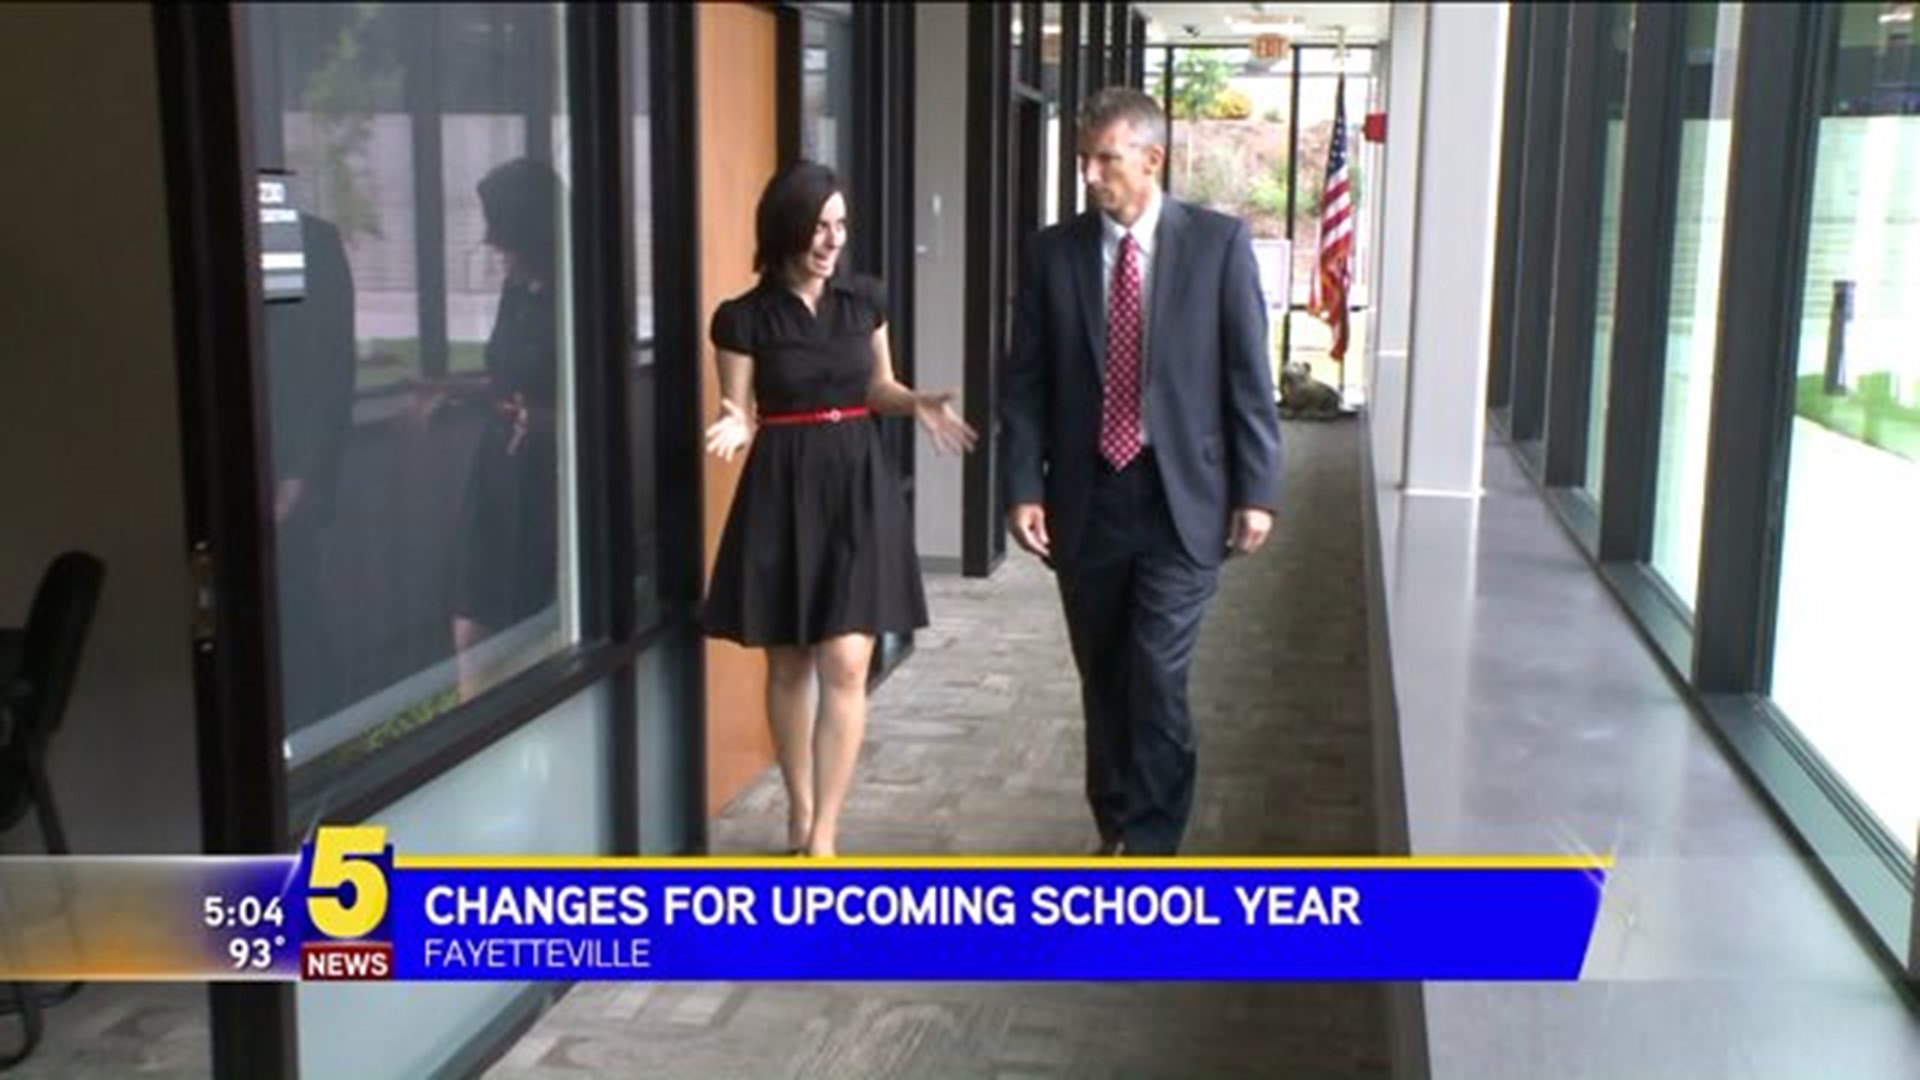 Changes at Fayetteville High School